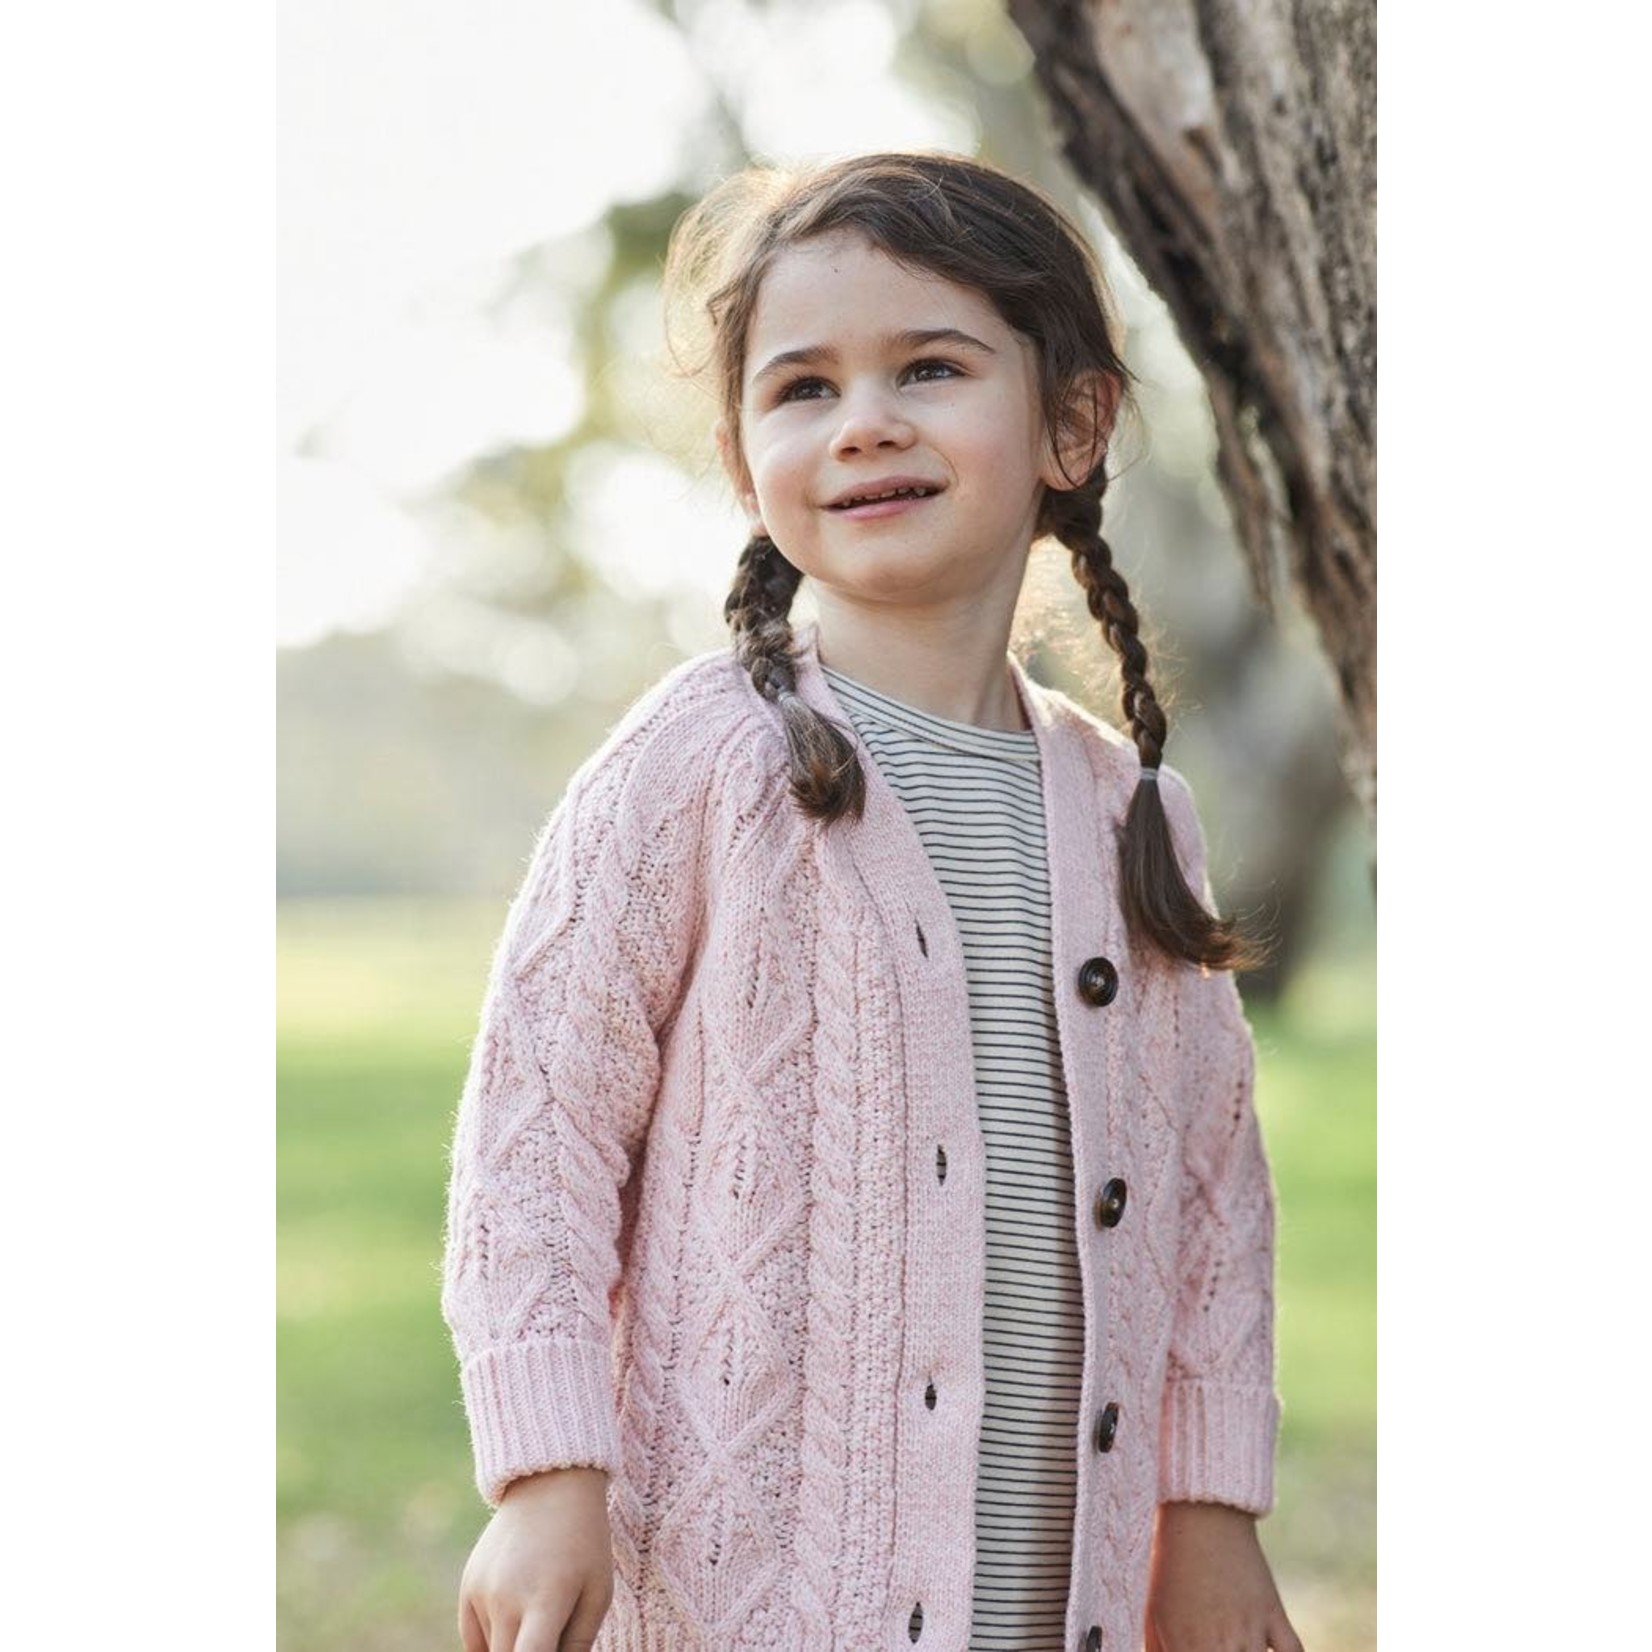 Milky Cable Fleck Knit Cardigan